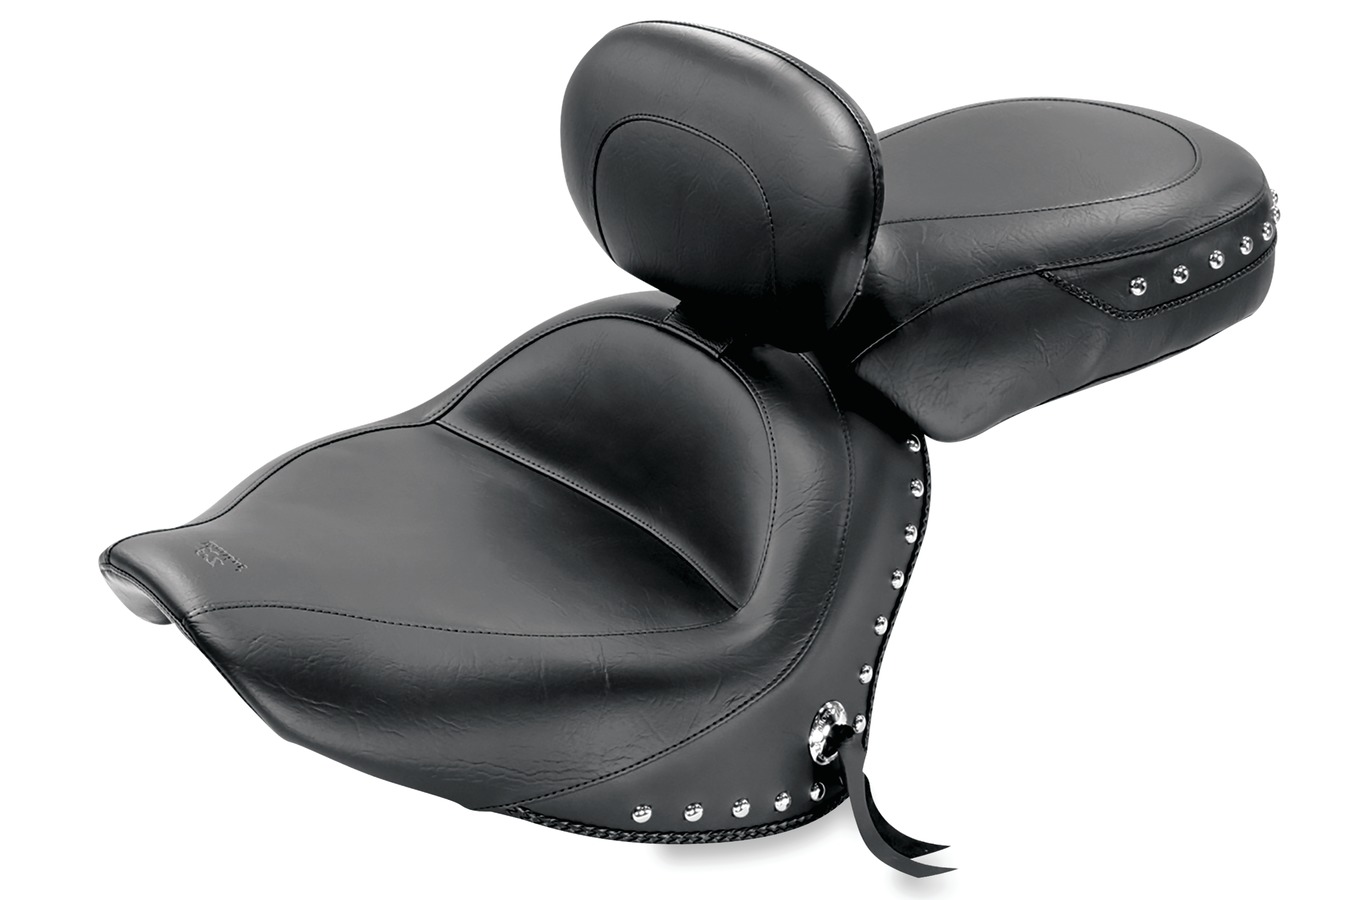 Wide Touring Two-Piece Seat with Driver Backrest for Yamaha V-Star 1300 & 1300 Tourer 2007-17, Chrome Studded, Black with Conchos